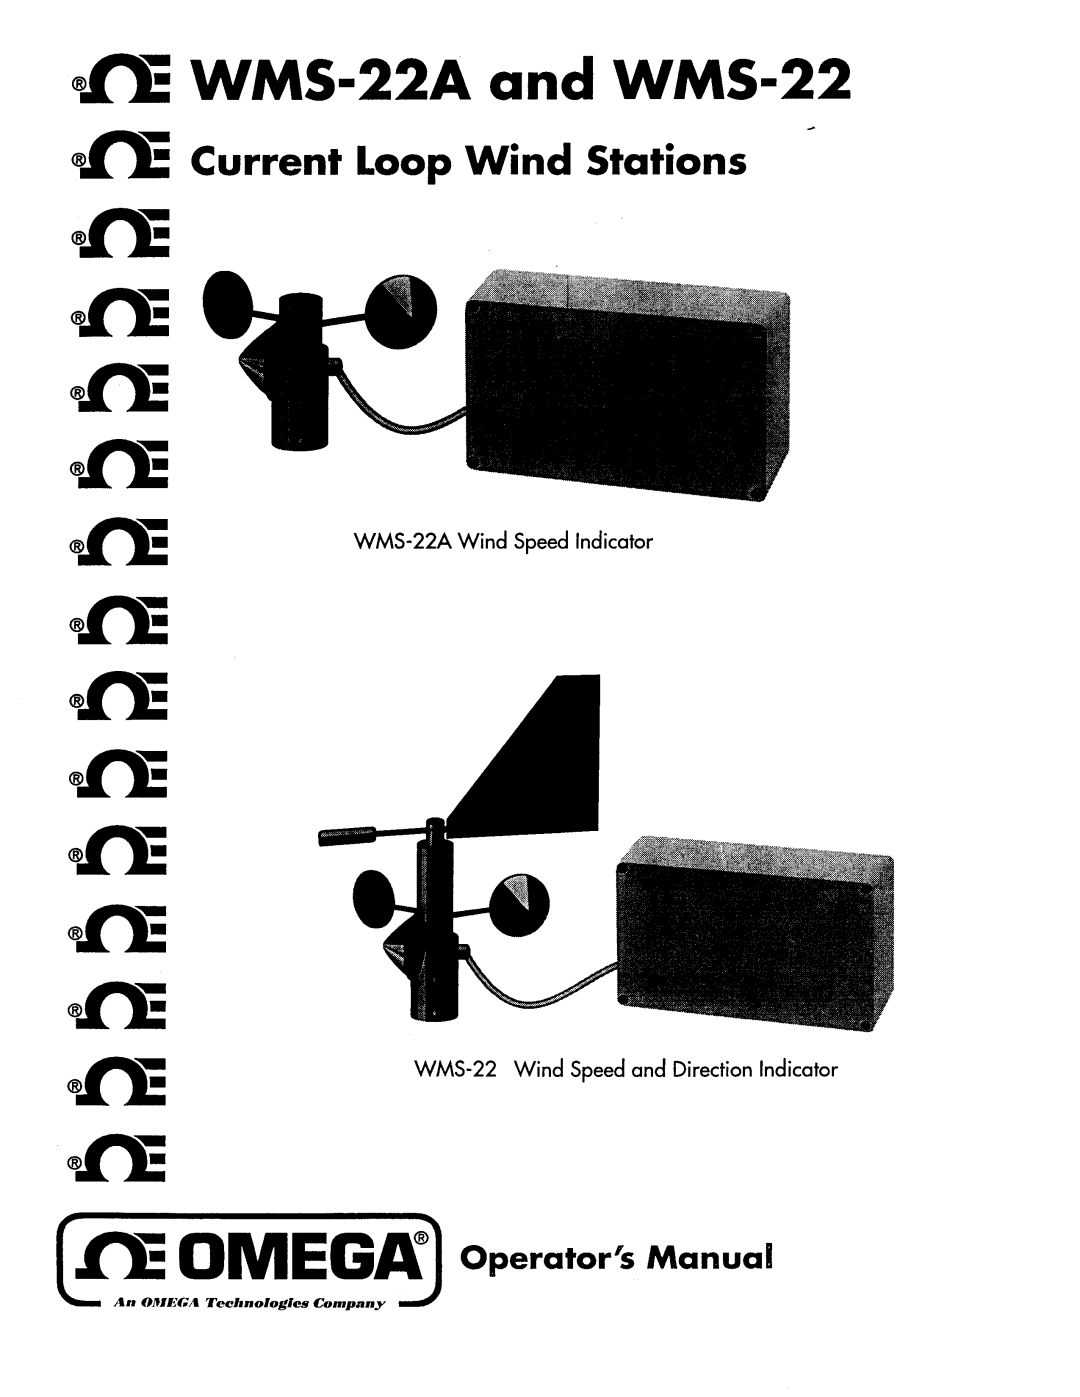 Omega Engineering manual @fl Current Loop Wind Stations, Operator ’s Manual, em WMS-22A and WMS-22 